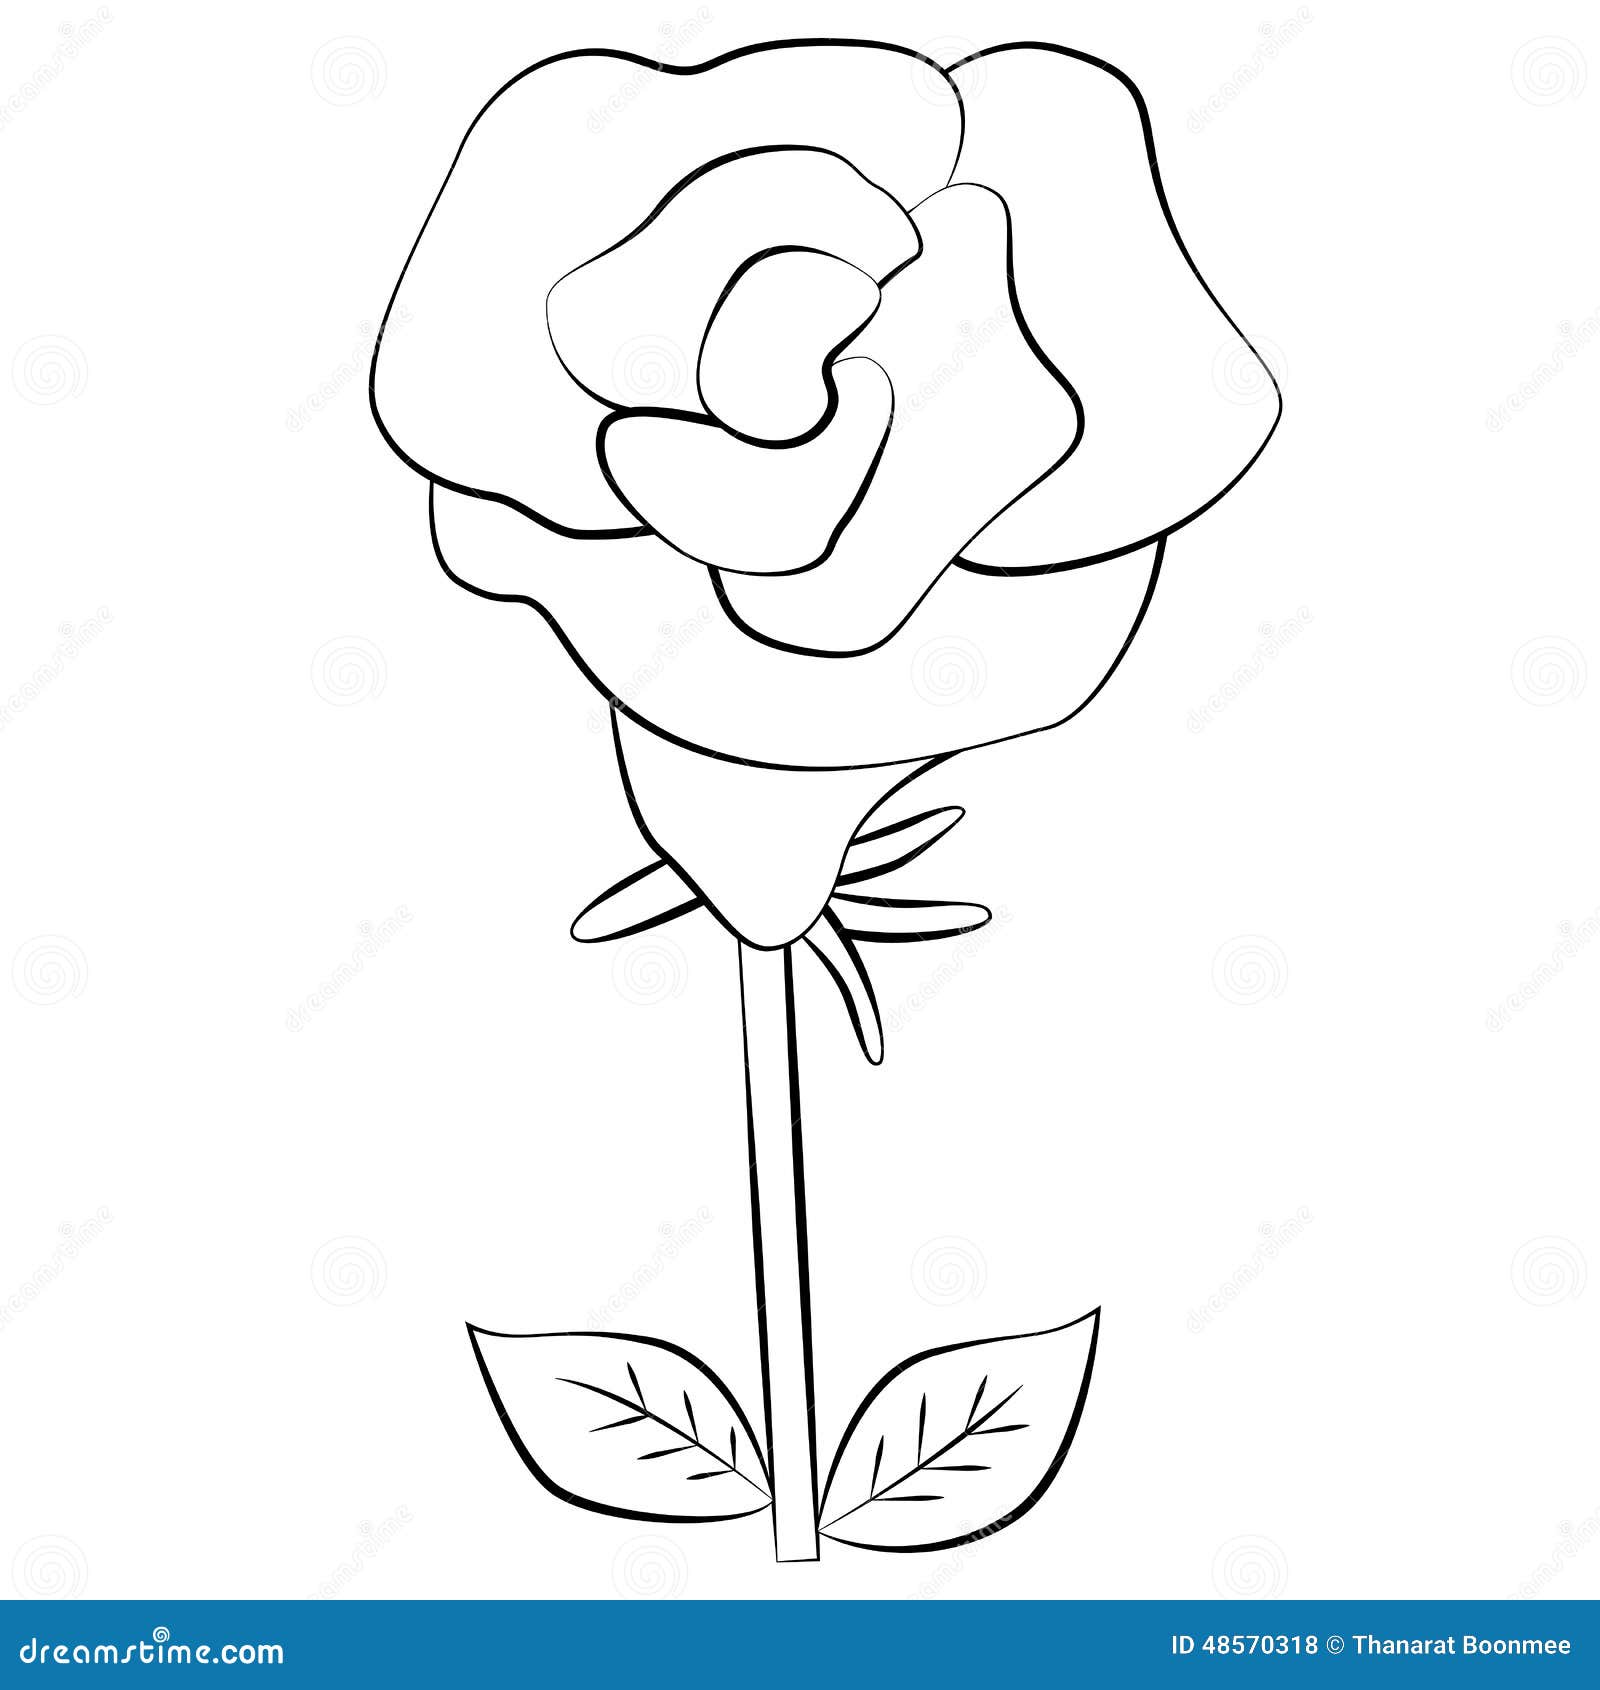 Rose stock vector. Illustration of pretty, outline, decoration - 48570318